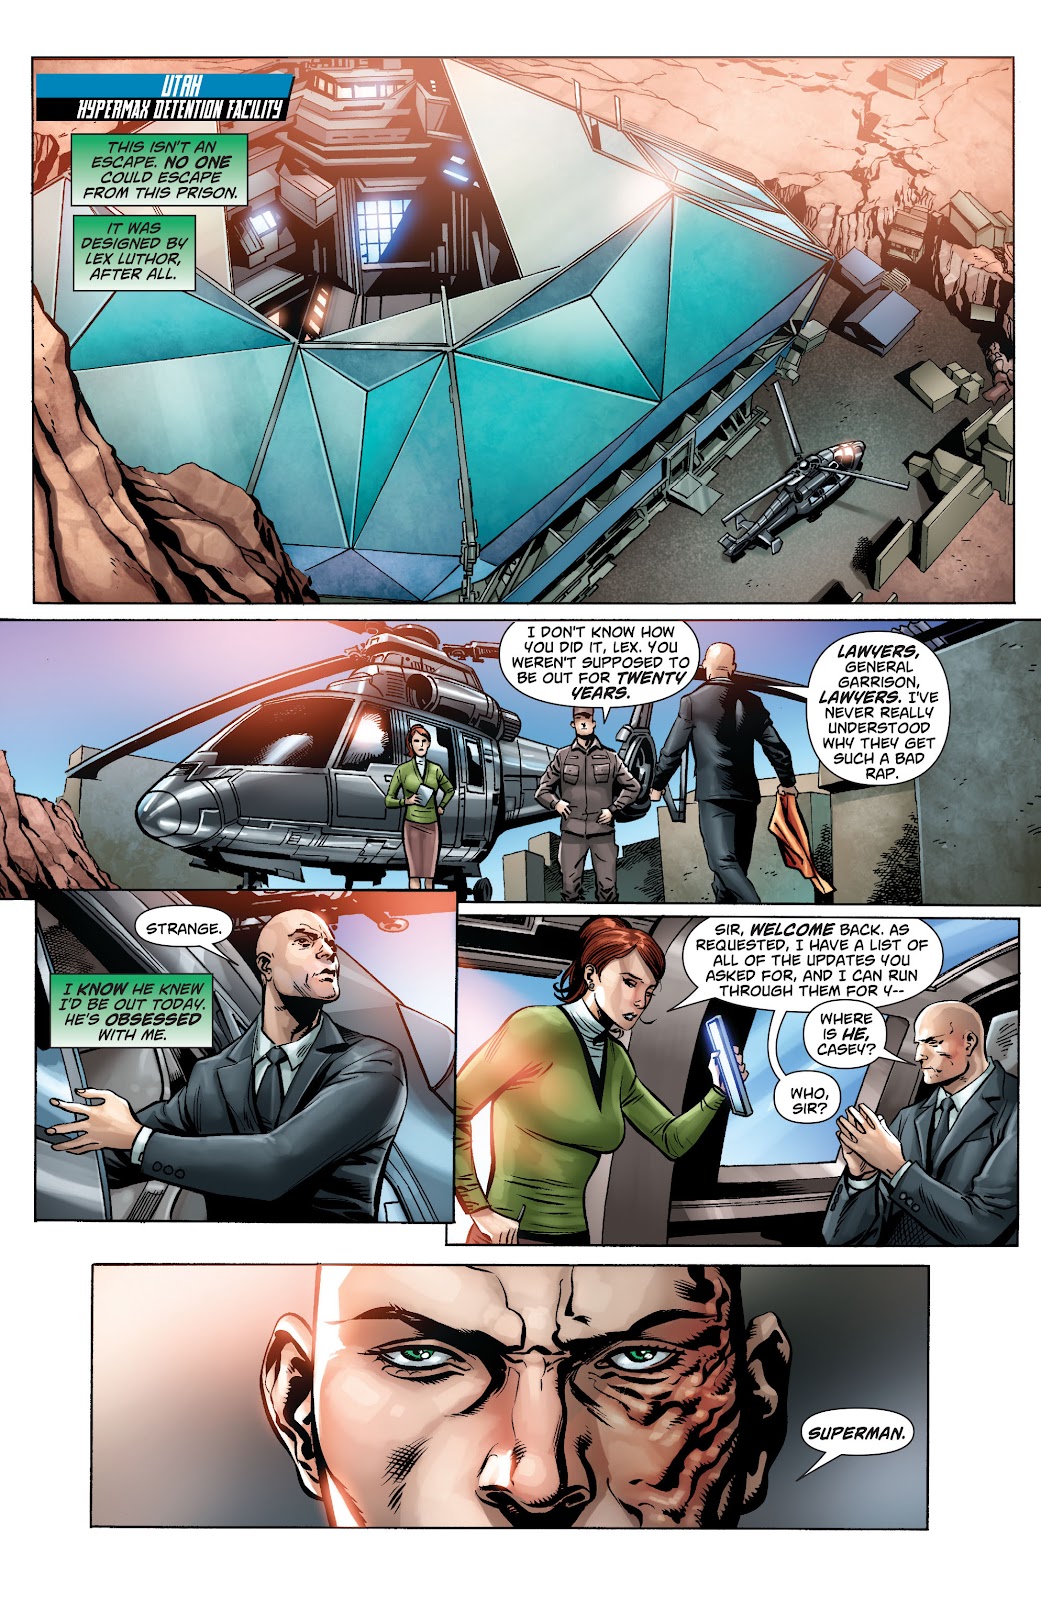 Action Comics (2011) issue 23.3 - Page 4